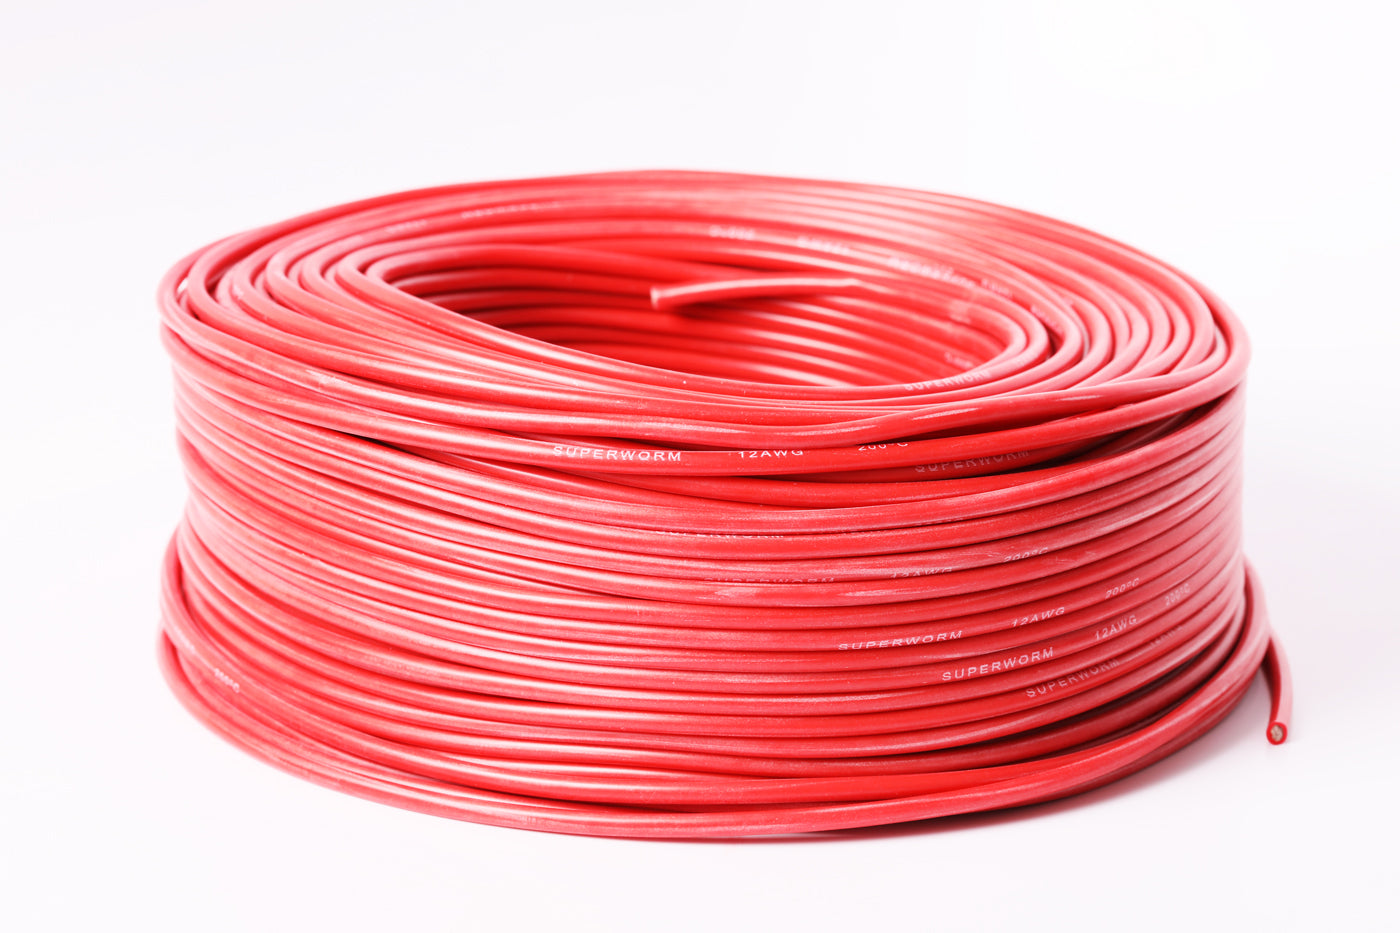 8 Gauge Silicone Wire 50 Feet Super Flexible Silicone Wire 8 AWG Superworm by Acer Racing